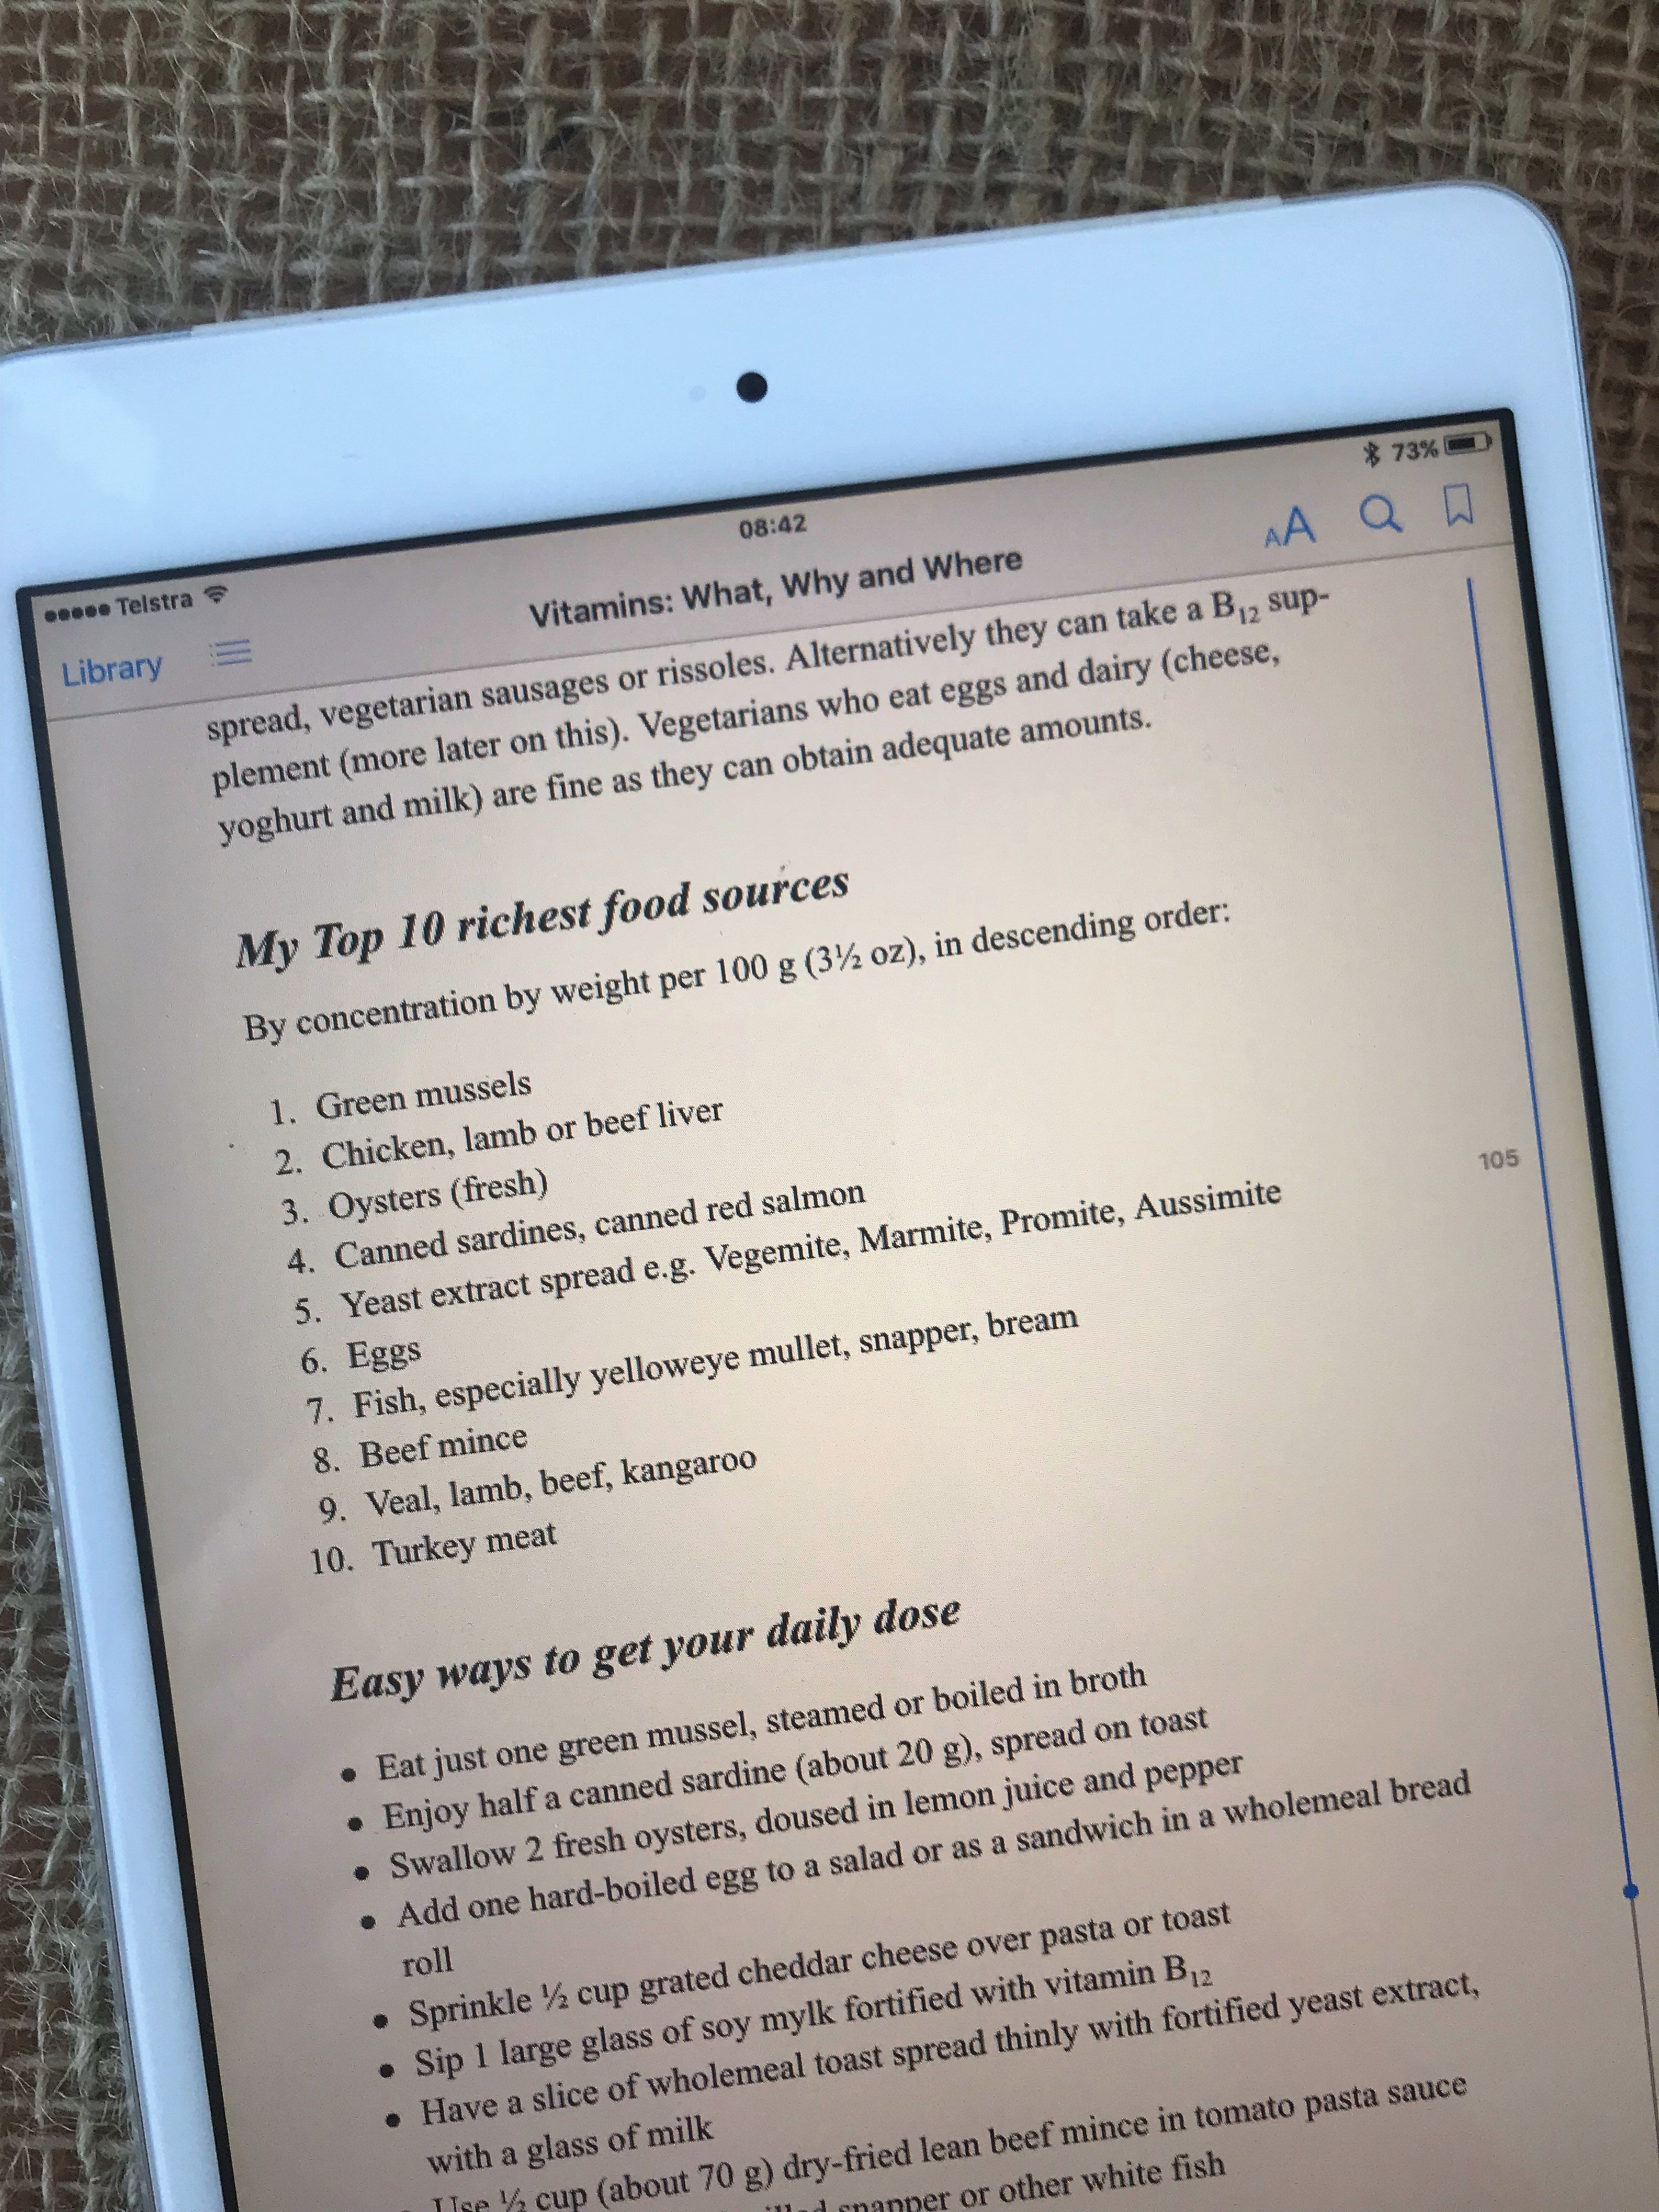 Vitamins - What, Why and Where ebook